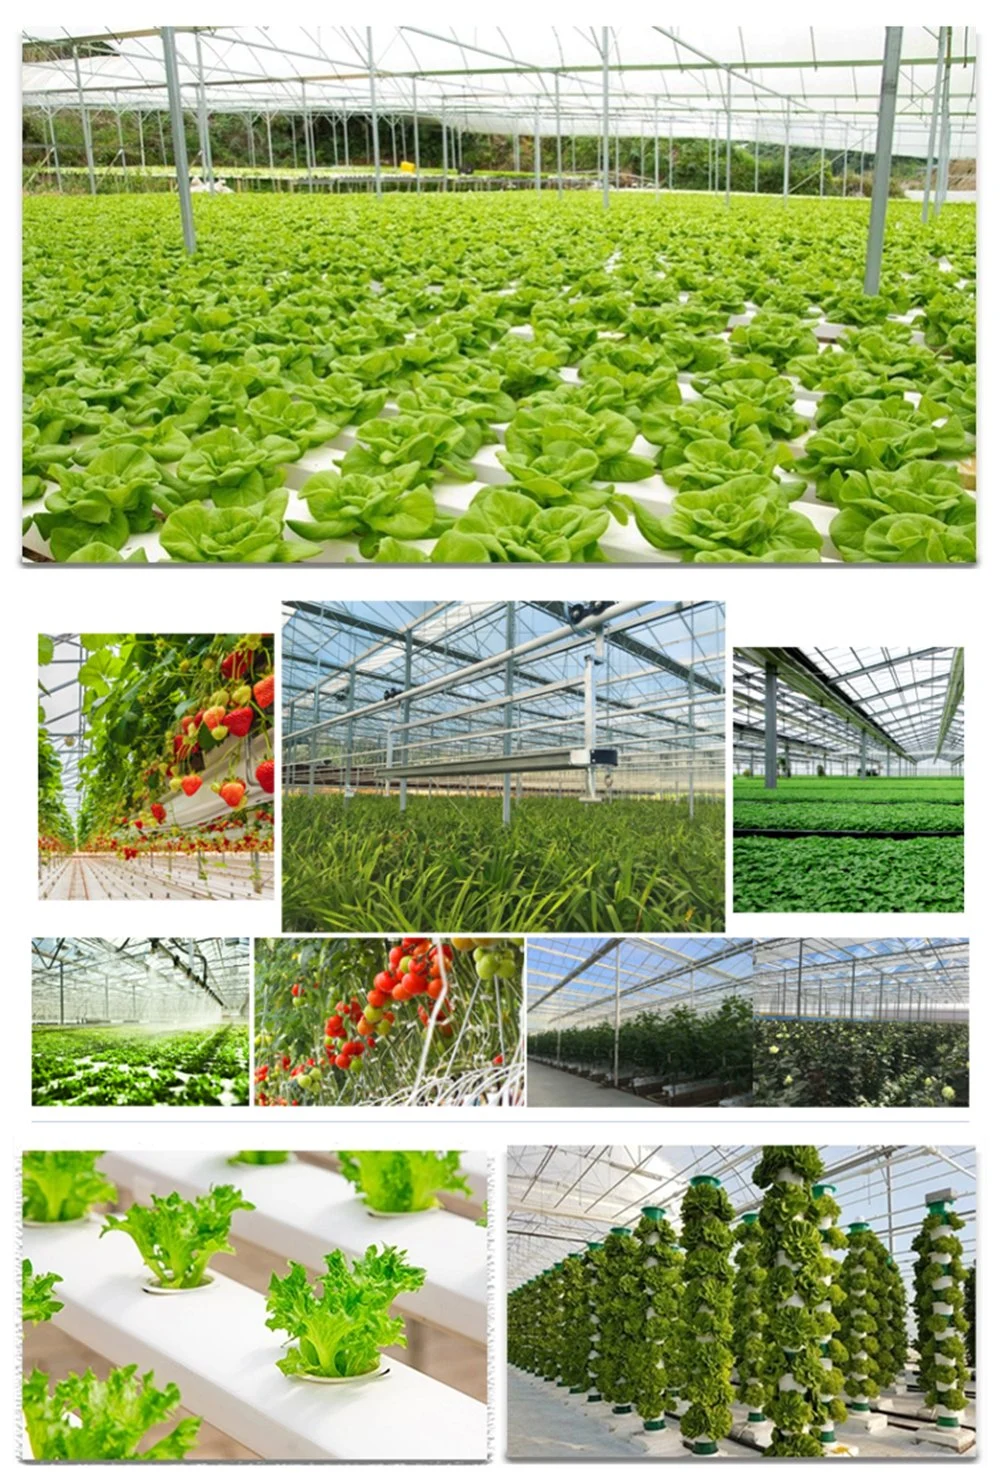 Automatic Agricultural/Industrial/Commercial Multi-Span Glass Greenhouse with Hydroponic Drip Irrigation System